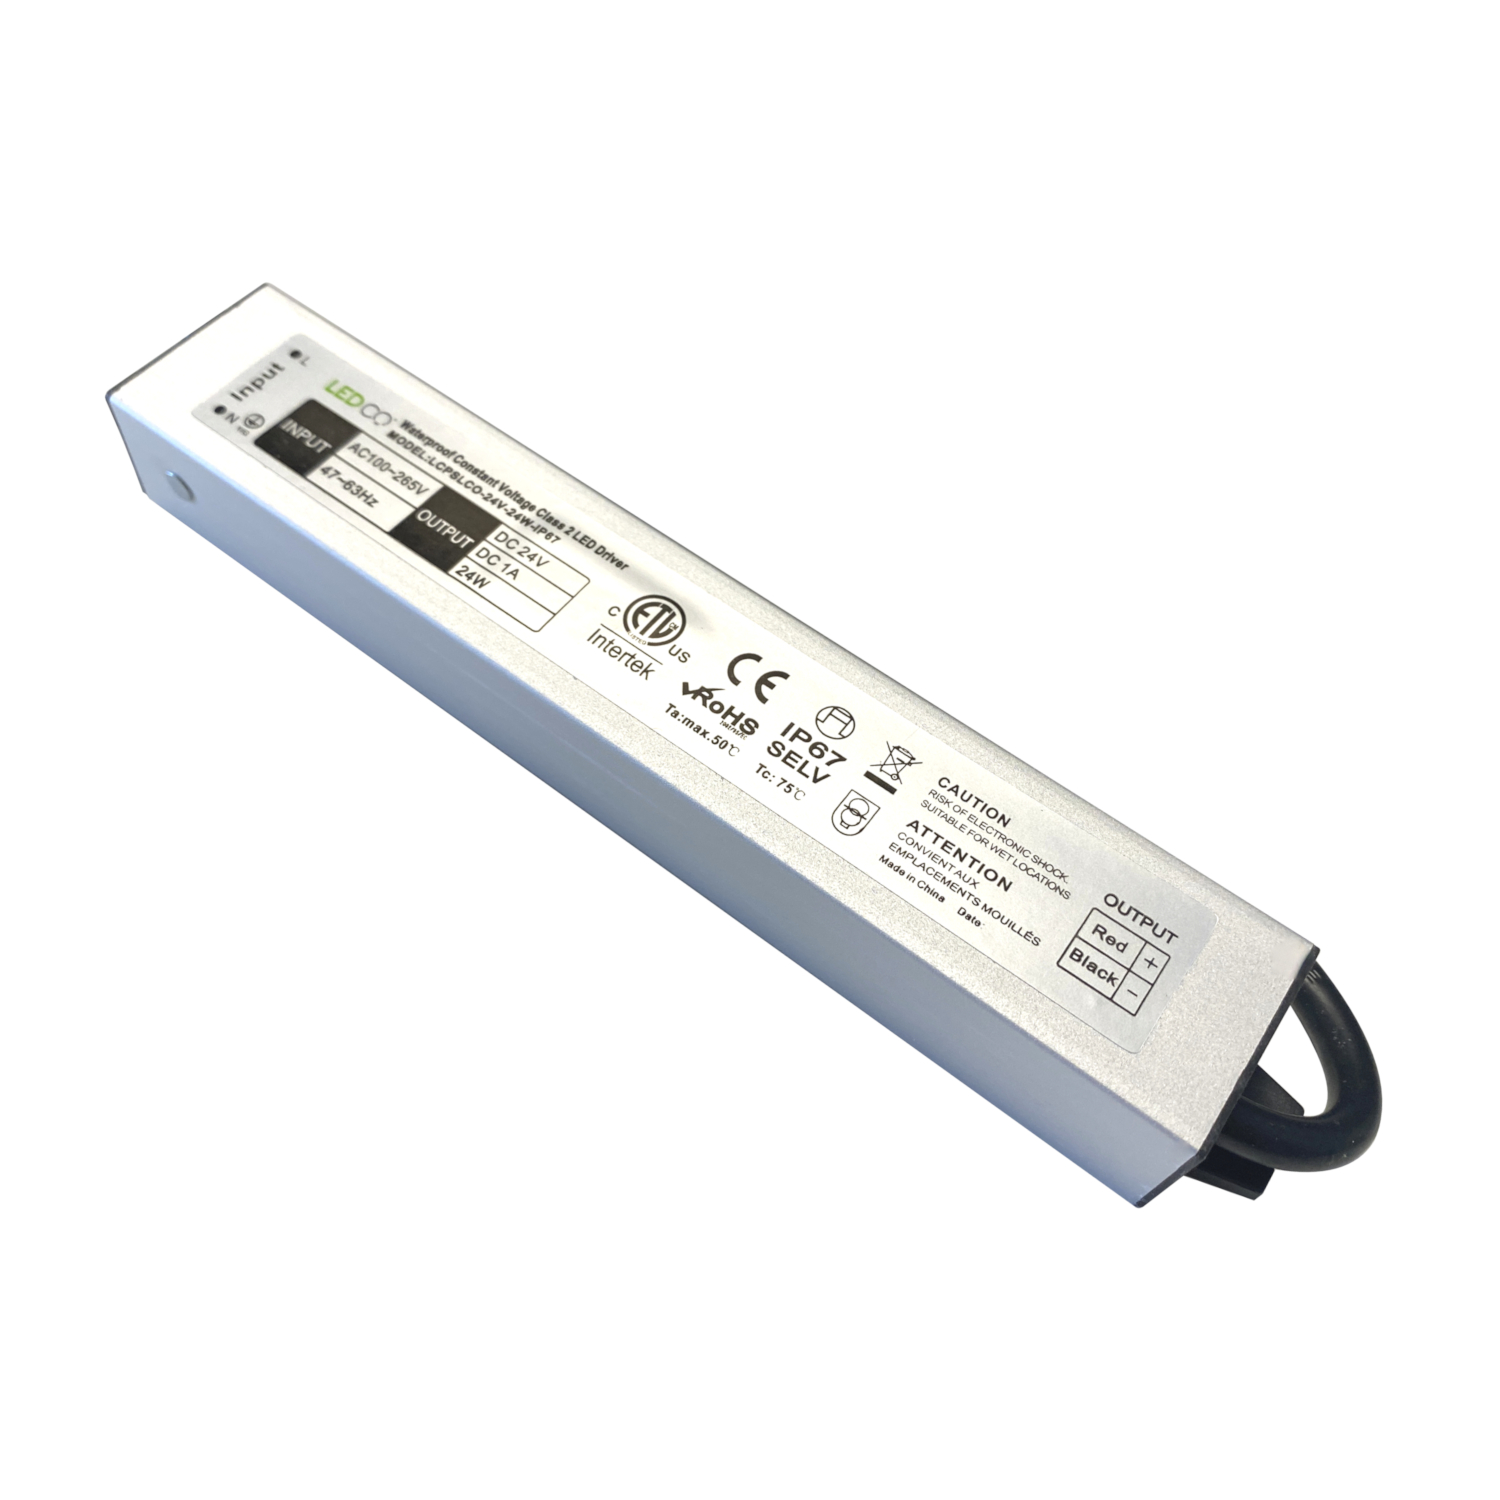 NON-DIMMABLE POWER SUPPLY - 24W